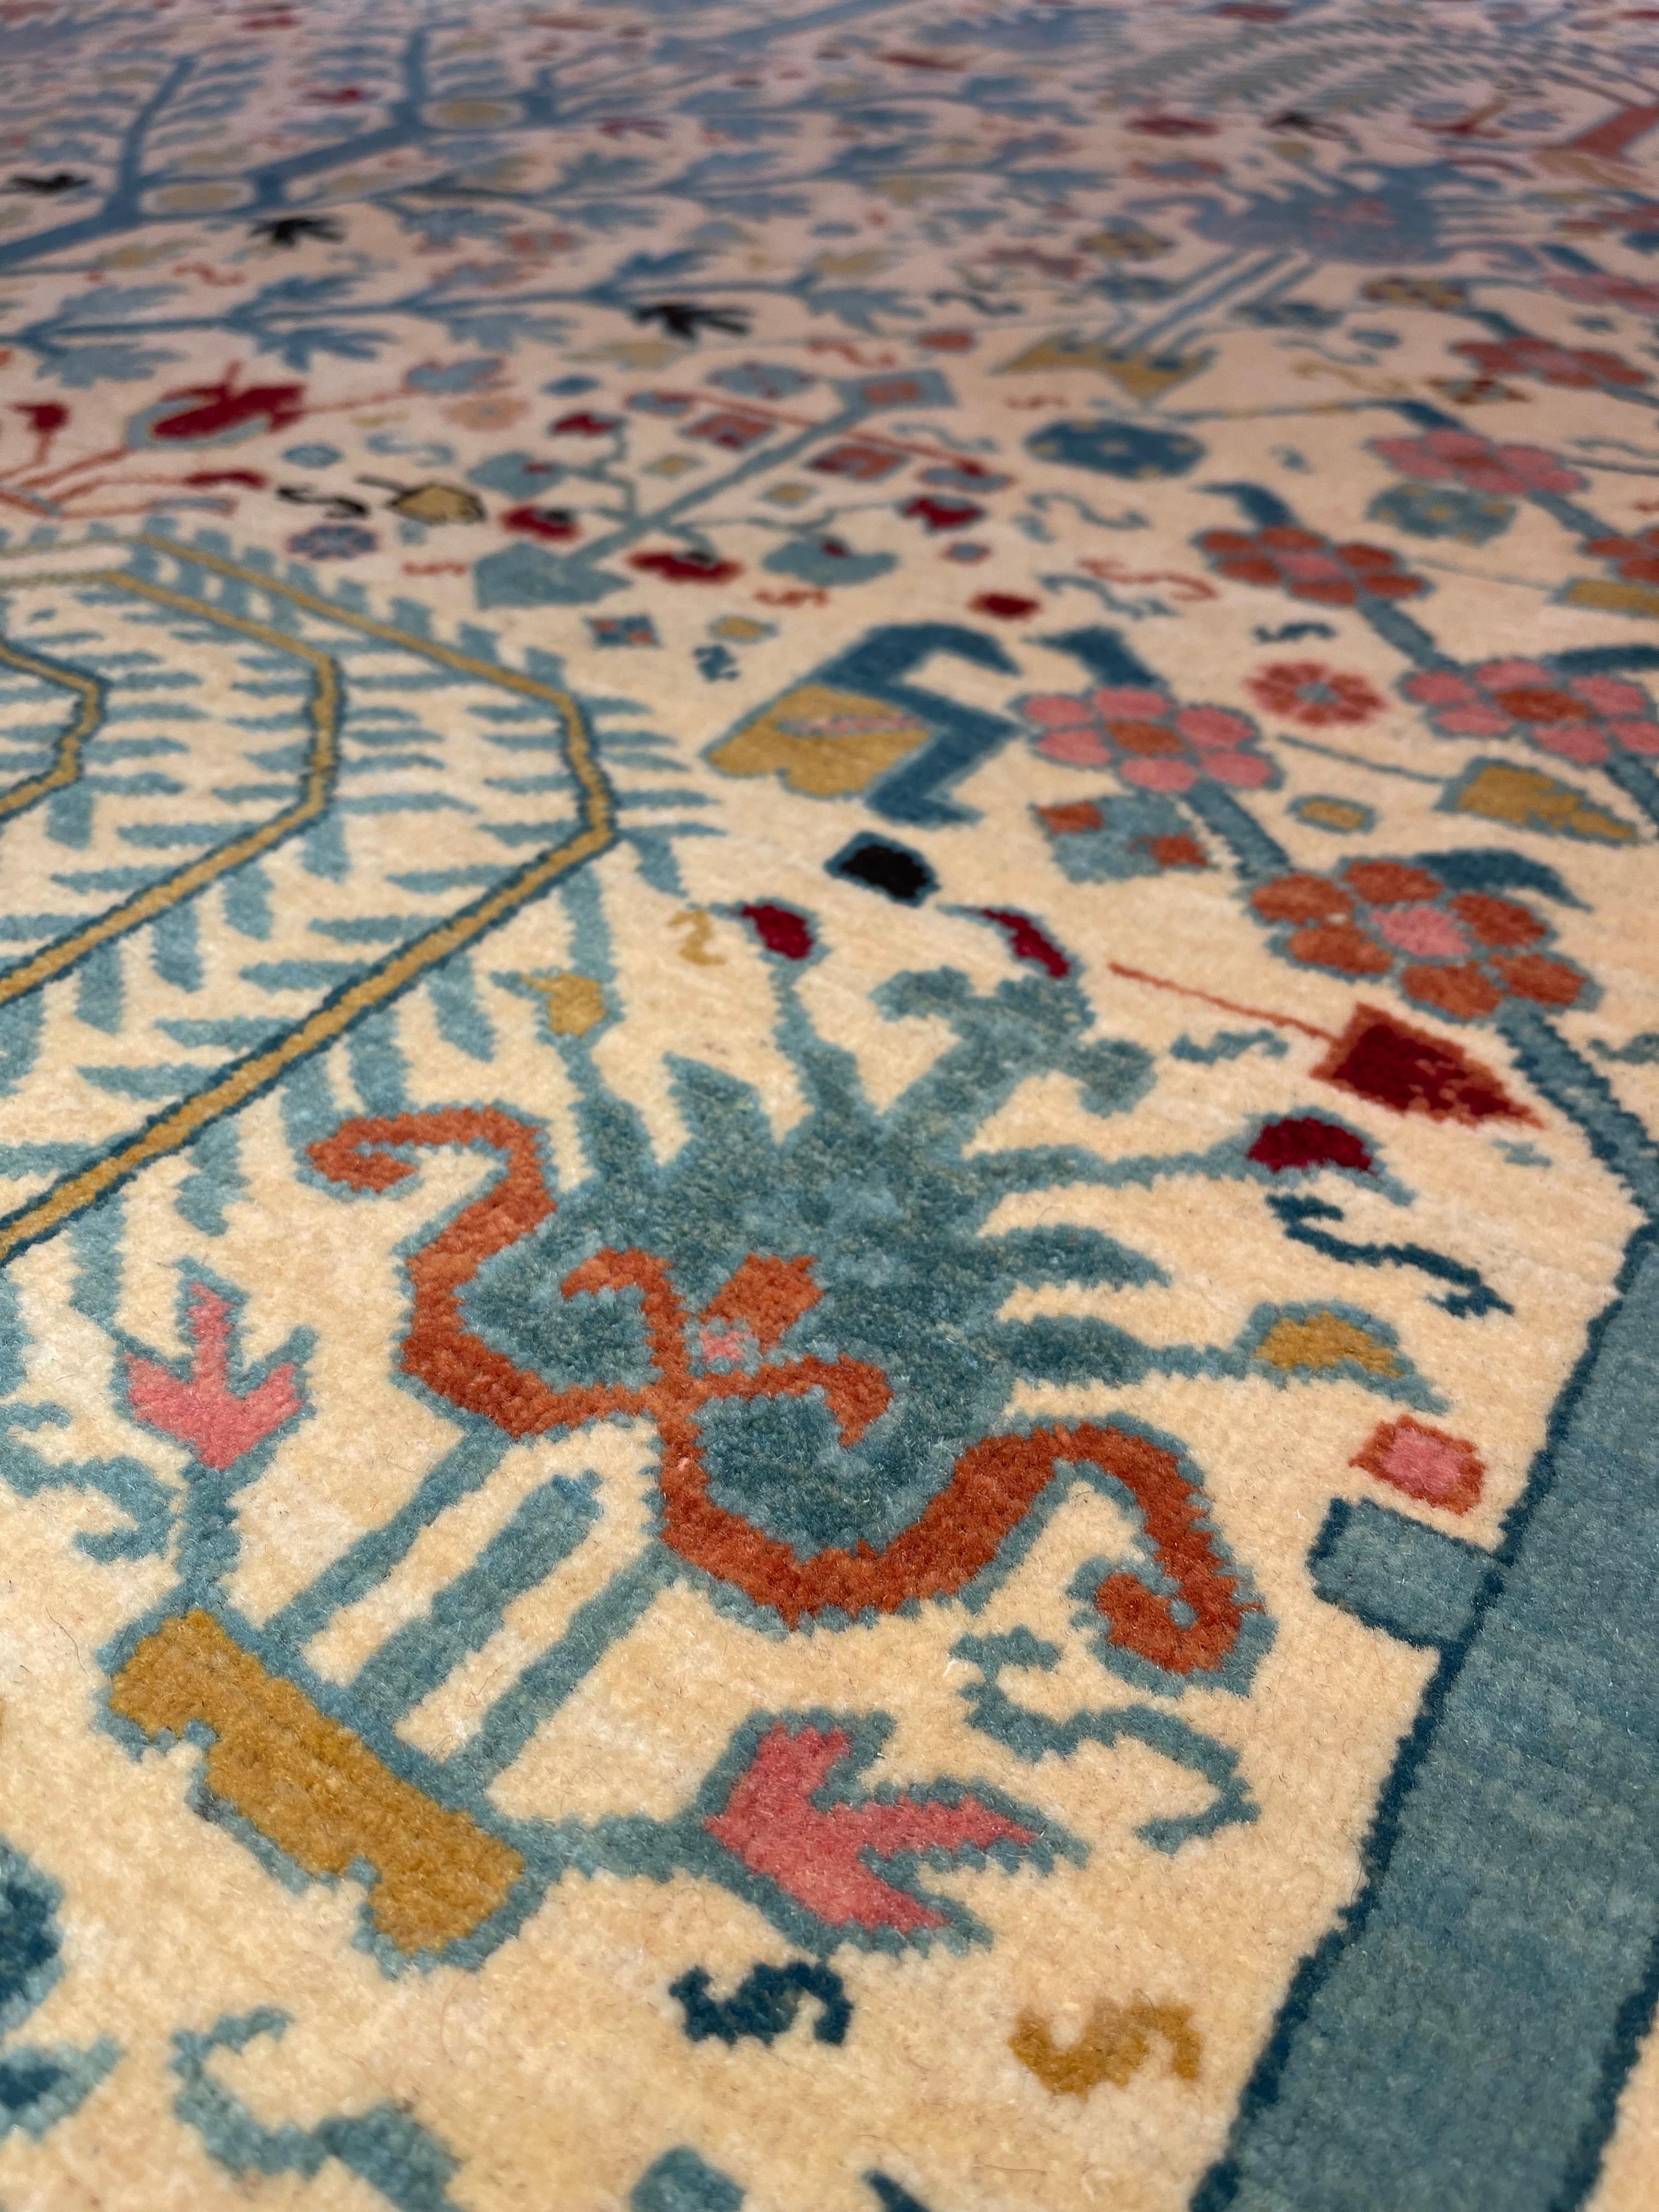 Contemporary Ararat Rugs Bid Majnum on White Field Rug, 17th Century Revival, Natural Dyed For Sale